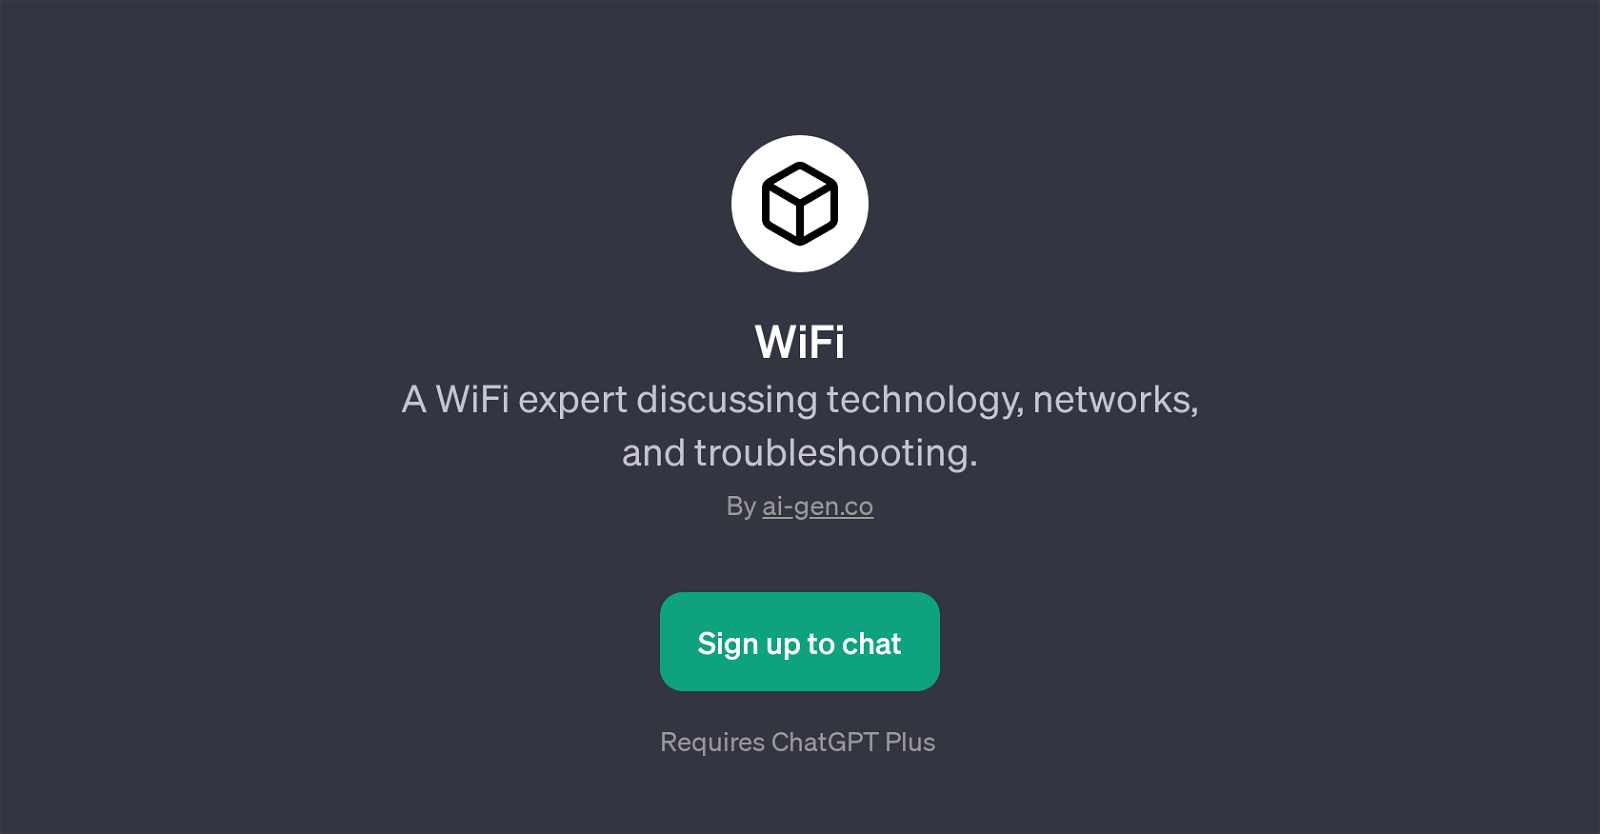 WiFiPage website